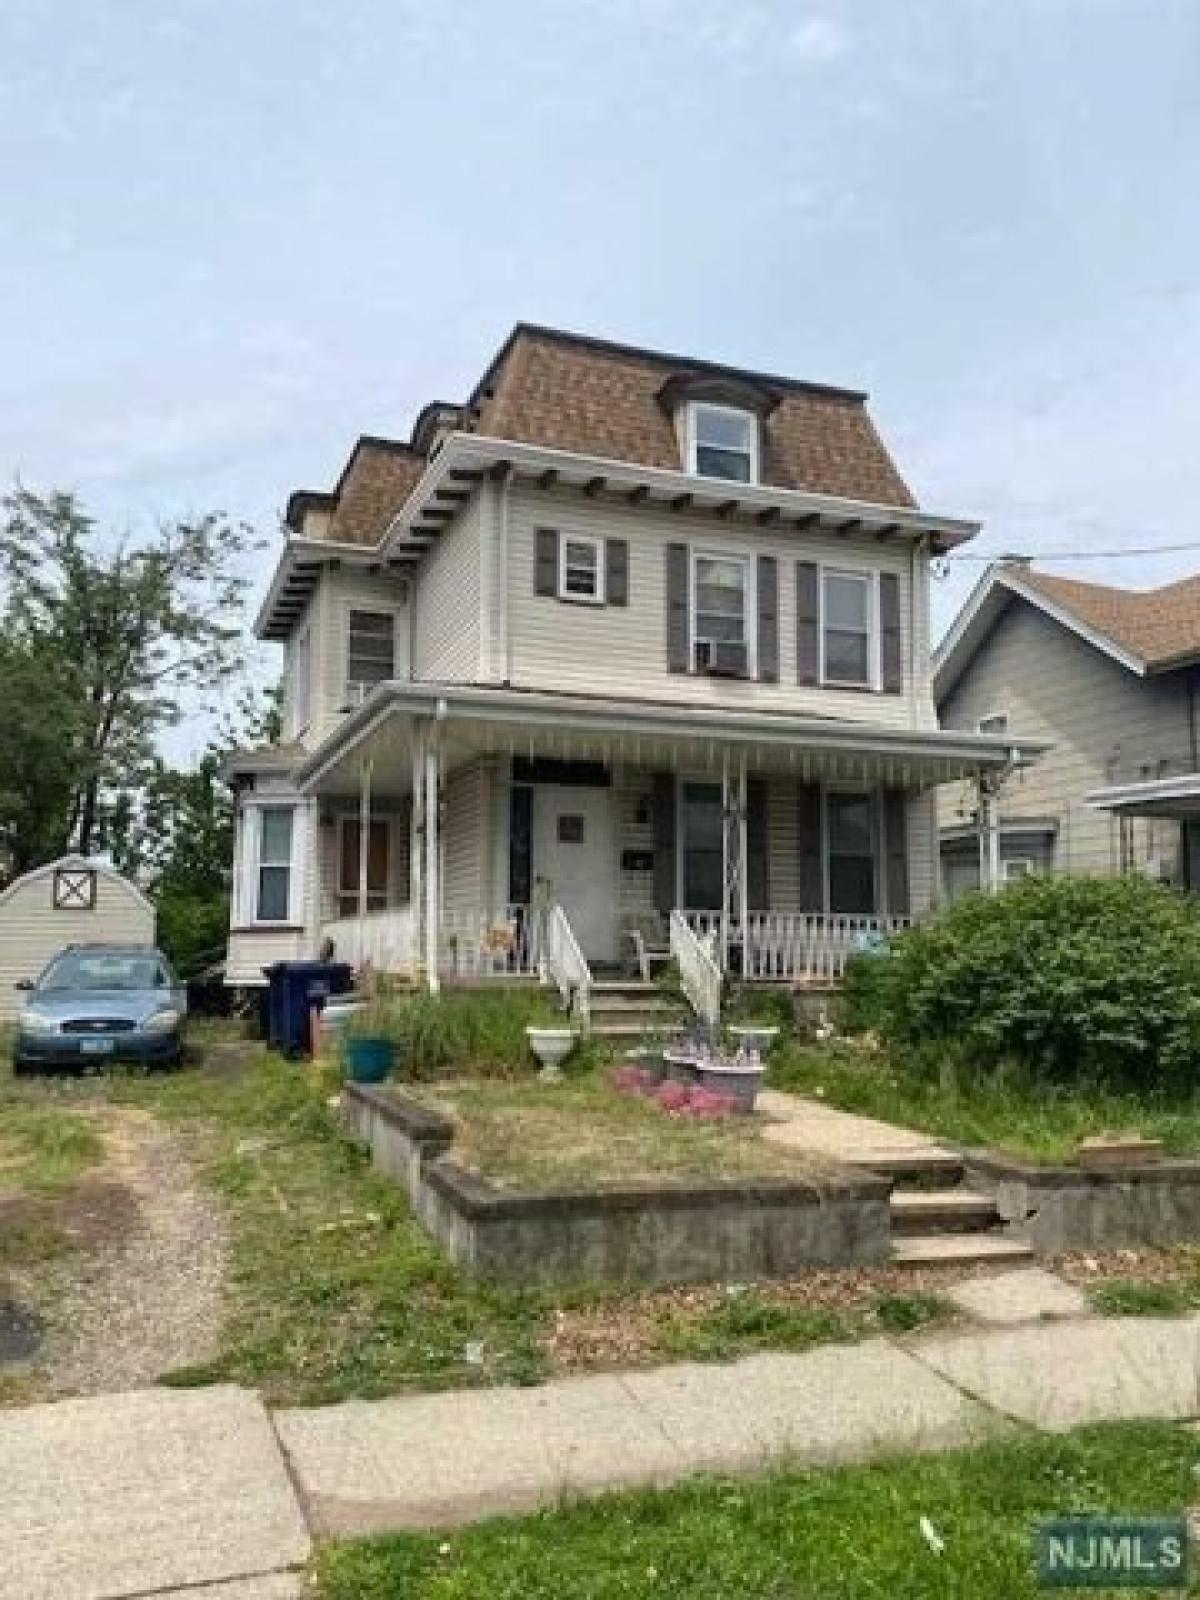 Picture of Home For Sale in Hackensack, New Jersey, United States